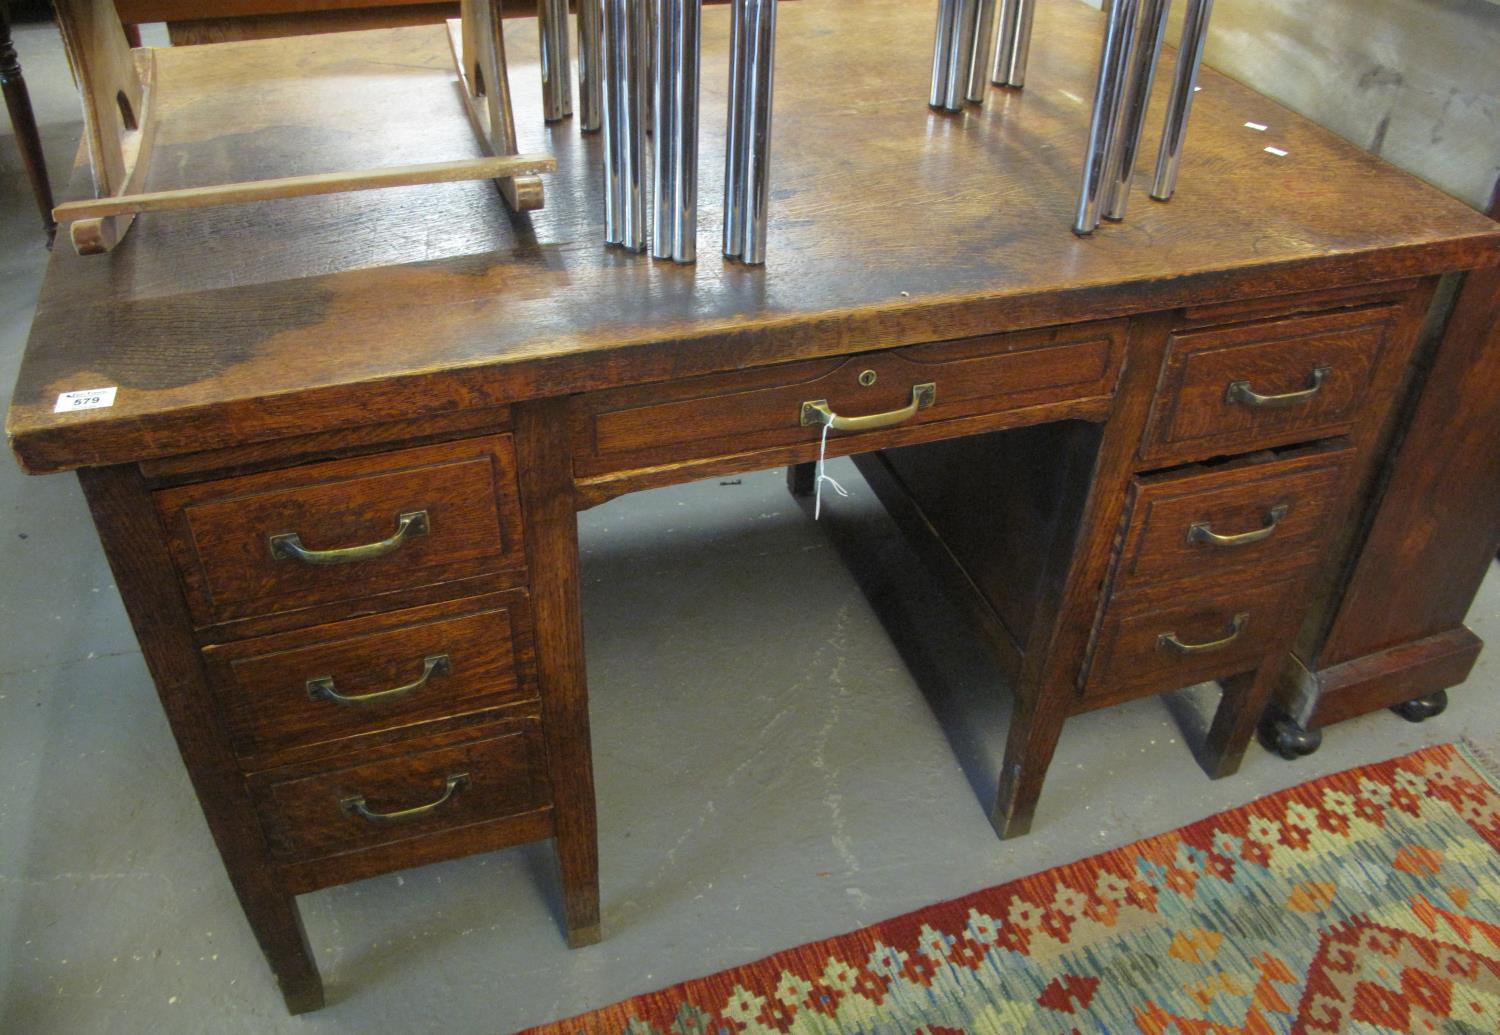 Early 20th Century oak twin pedestal knee hole solicitor or office desk.(B.P. 24% incl. VAT)